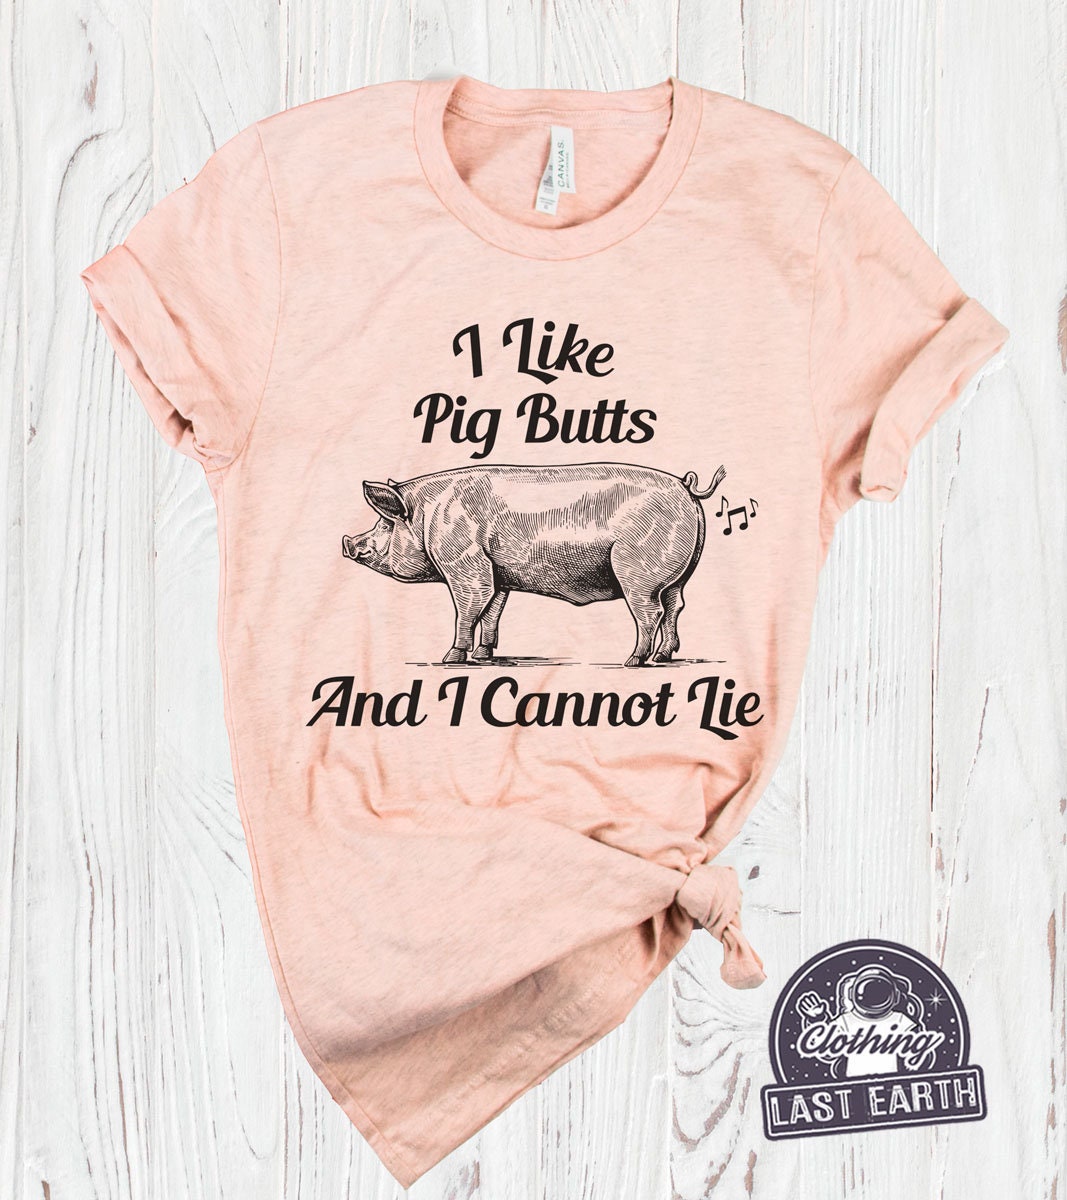 I Like Pig Butts and I Cannot Lie T-shirt Animal Print Funny | Etsy